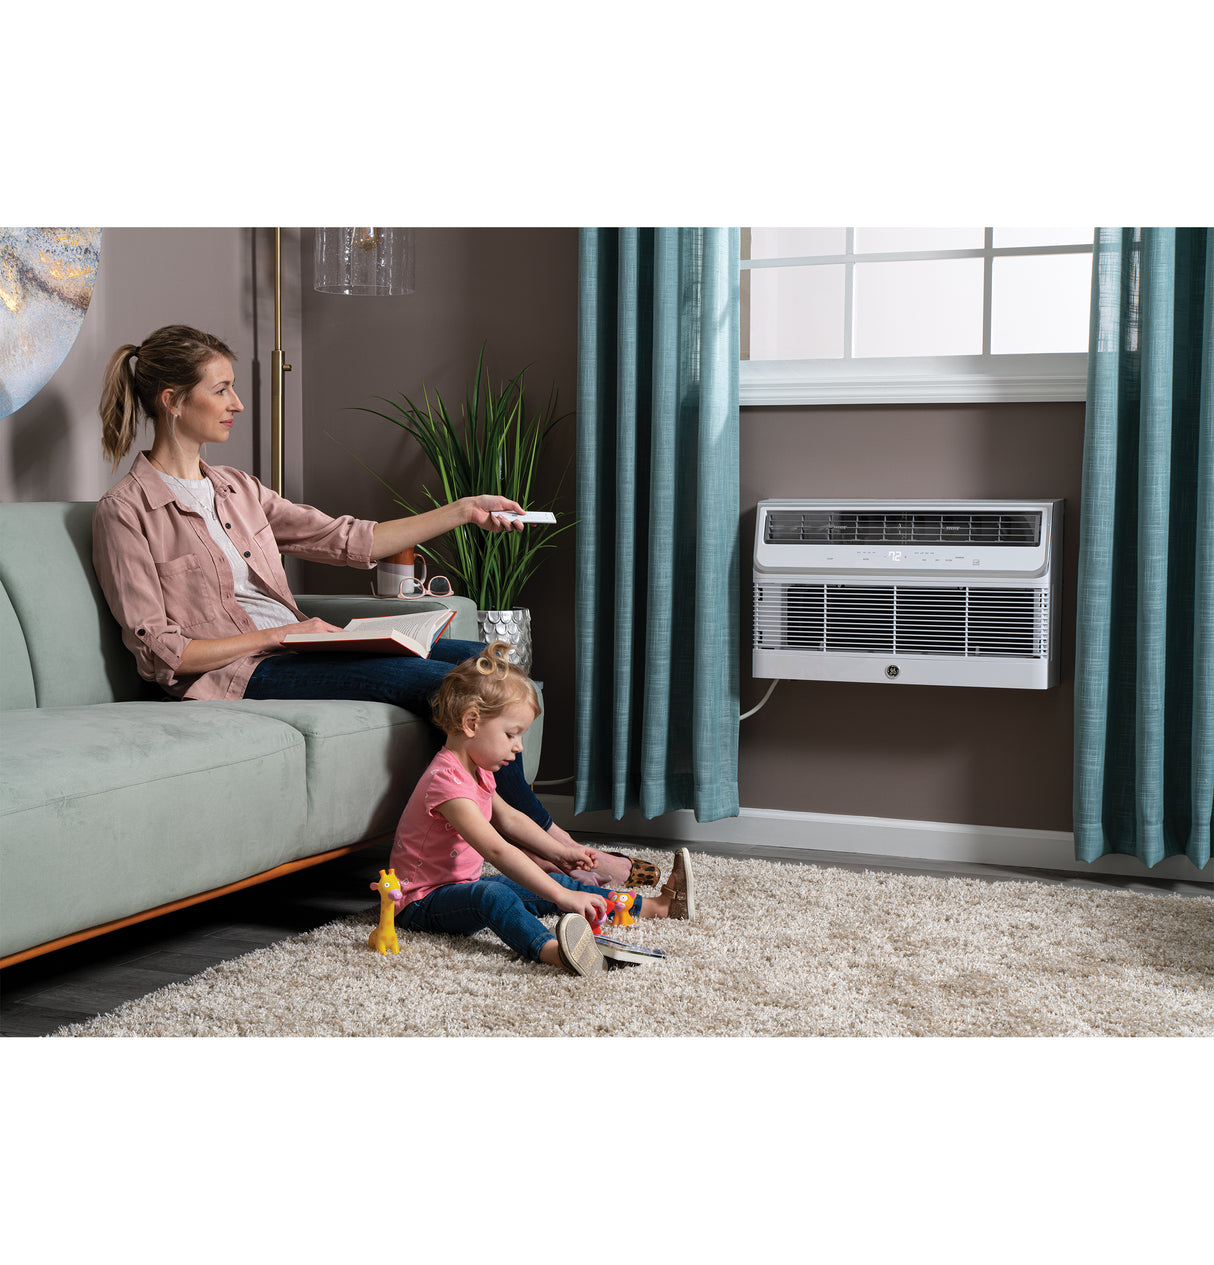 GE(R) ENERGY STAR(R) 115 Volt Built-In Cool-Only Room Air Conditioner - (AJCQ08AWH)